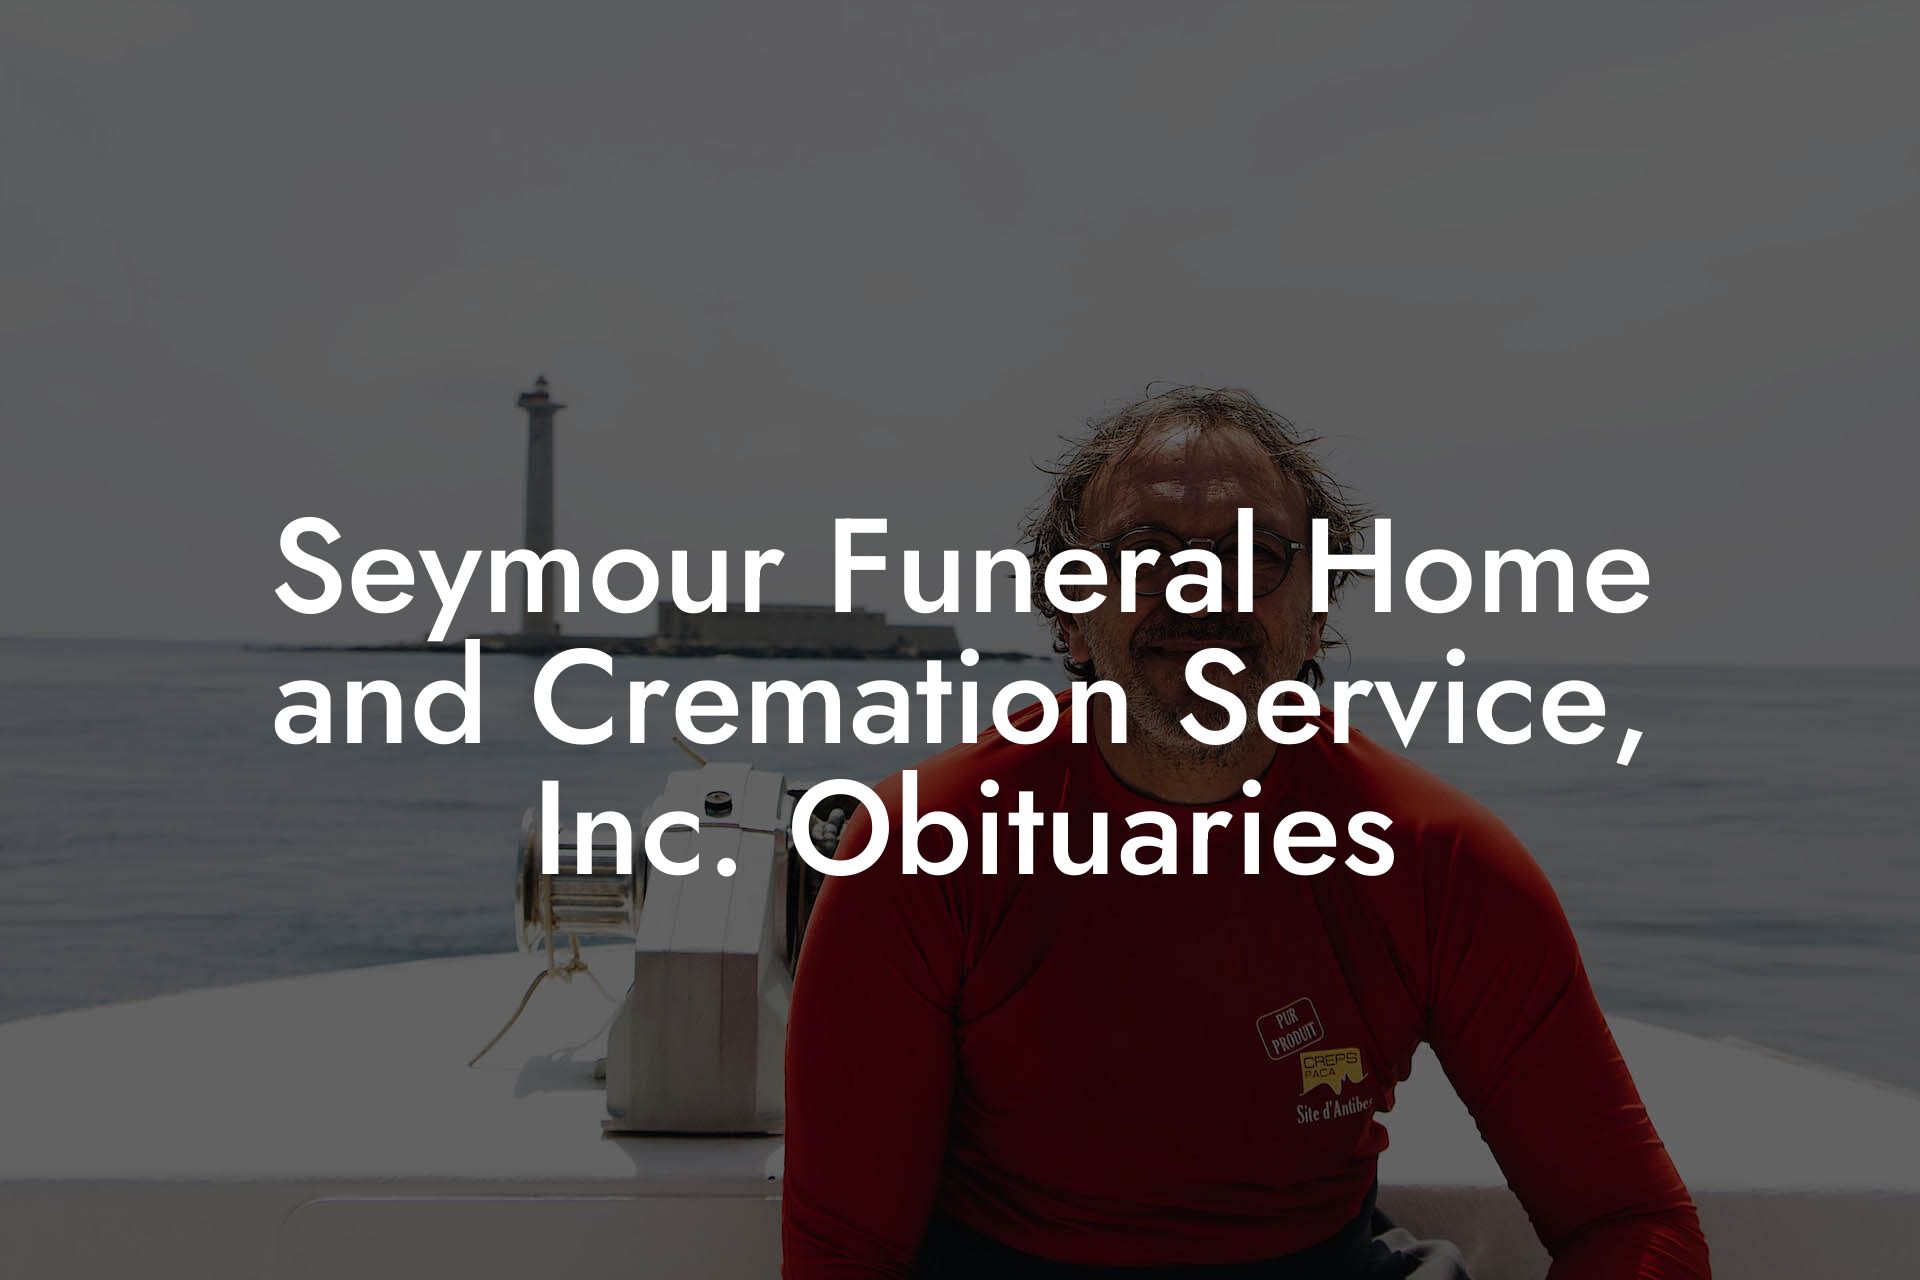 Seymour Funeral Home and Cremation Service, Inc. Obituaries